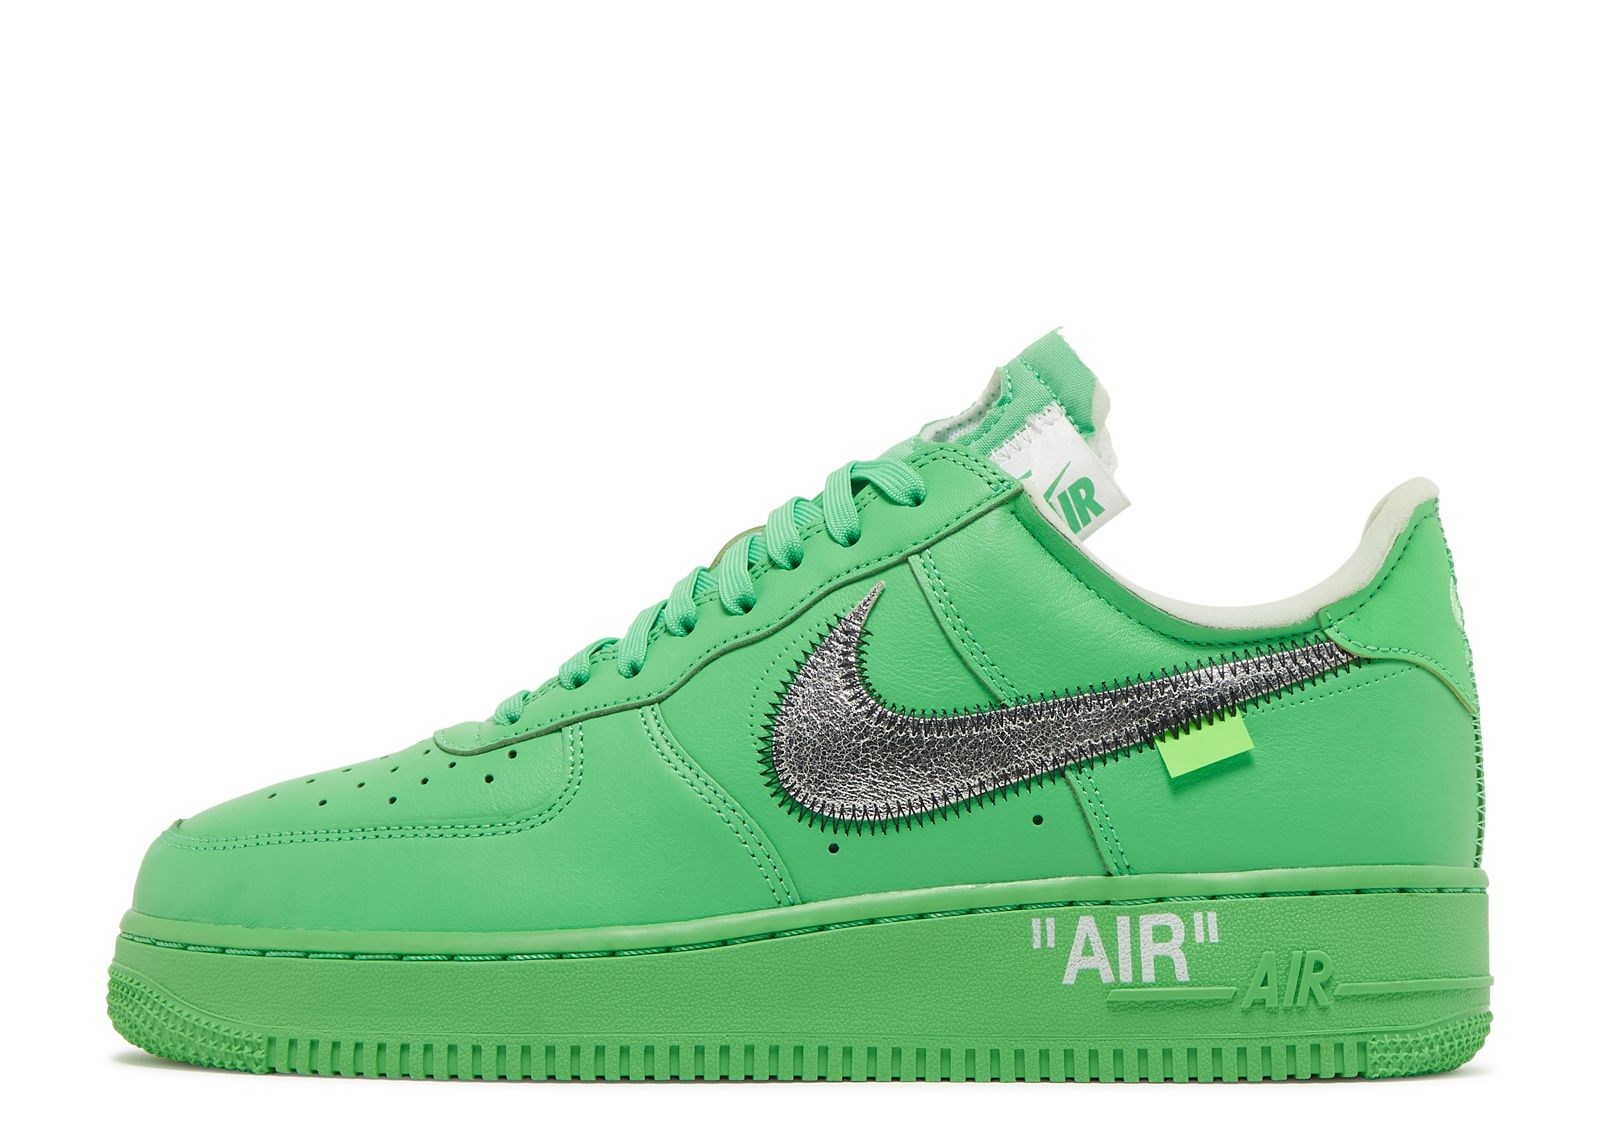 Off White X Air Force 1 Low 'Brooklyn' - Nike - DX1419 300 - light 